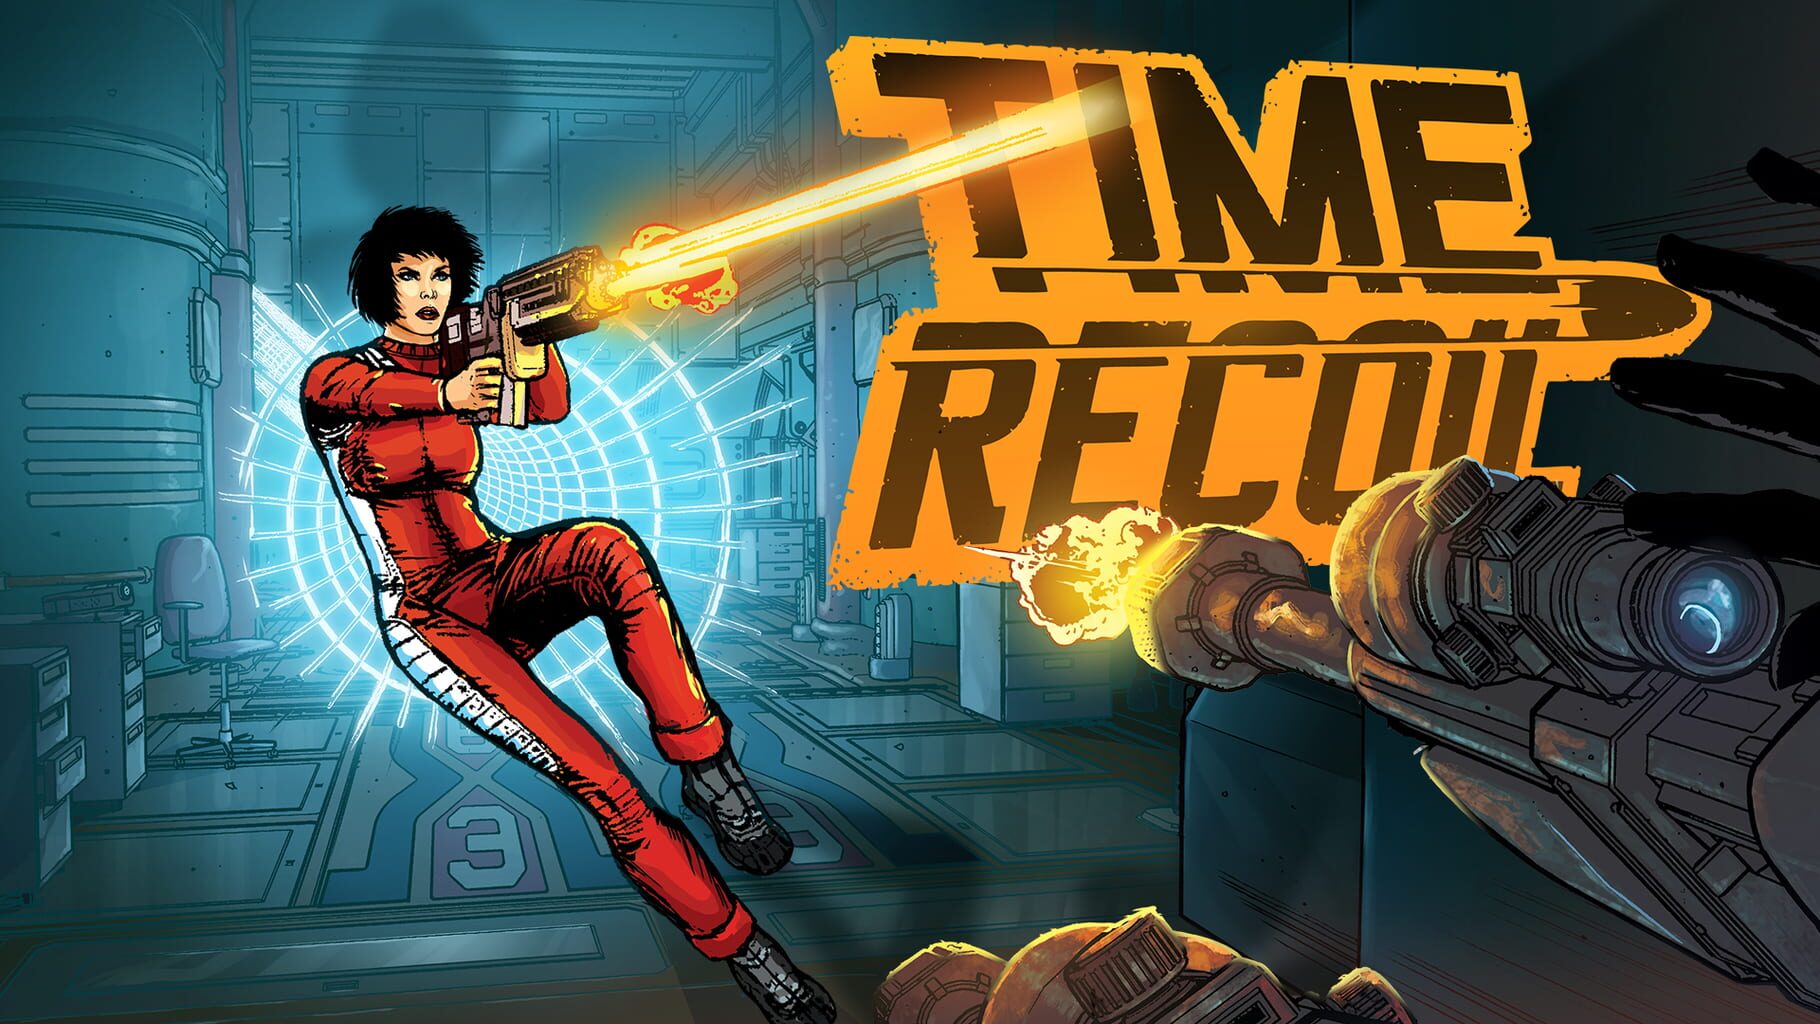 Artwork for Time Recoil